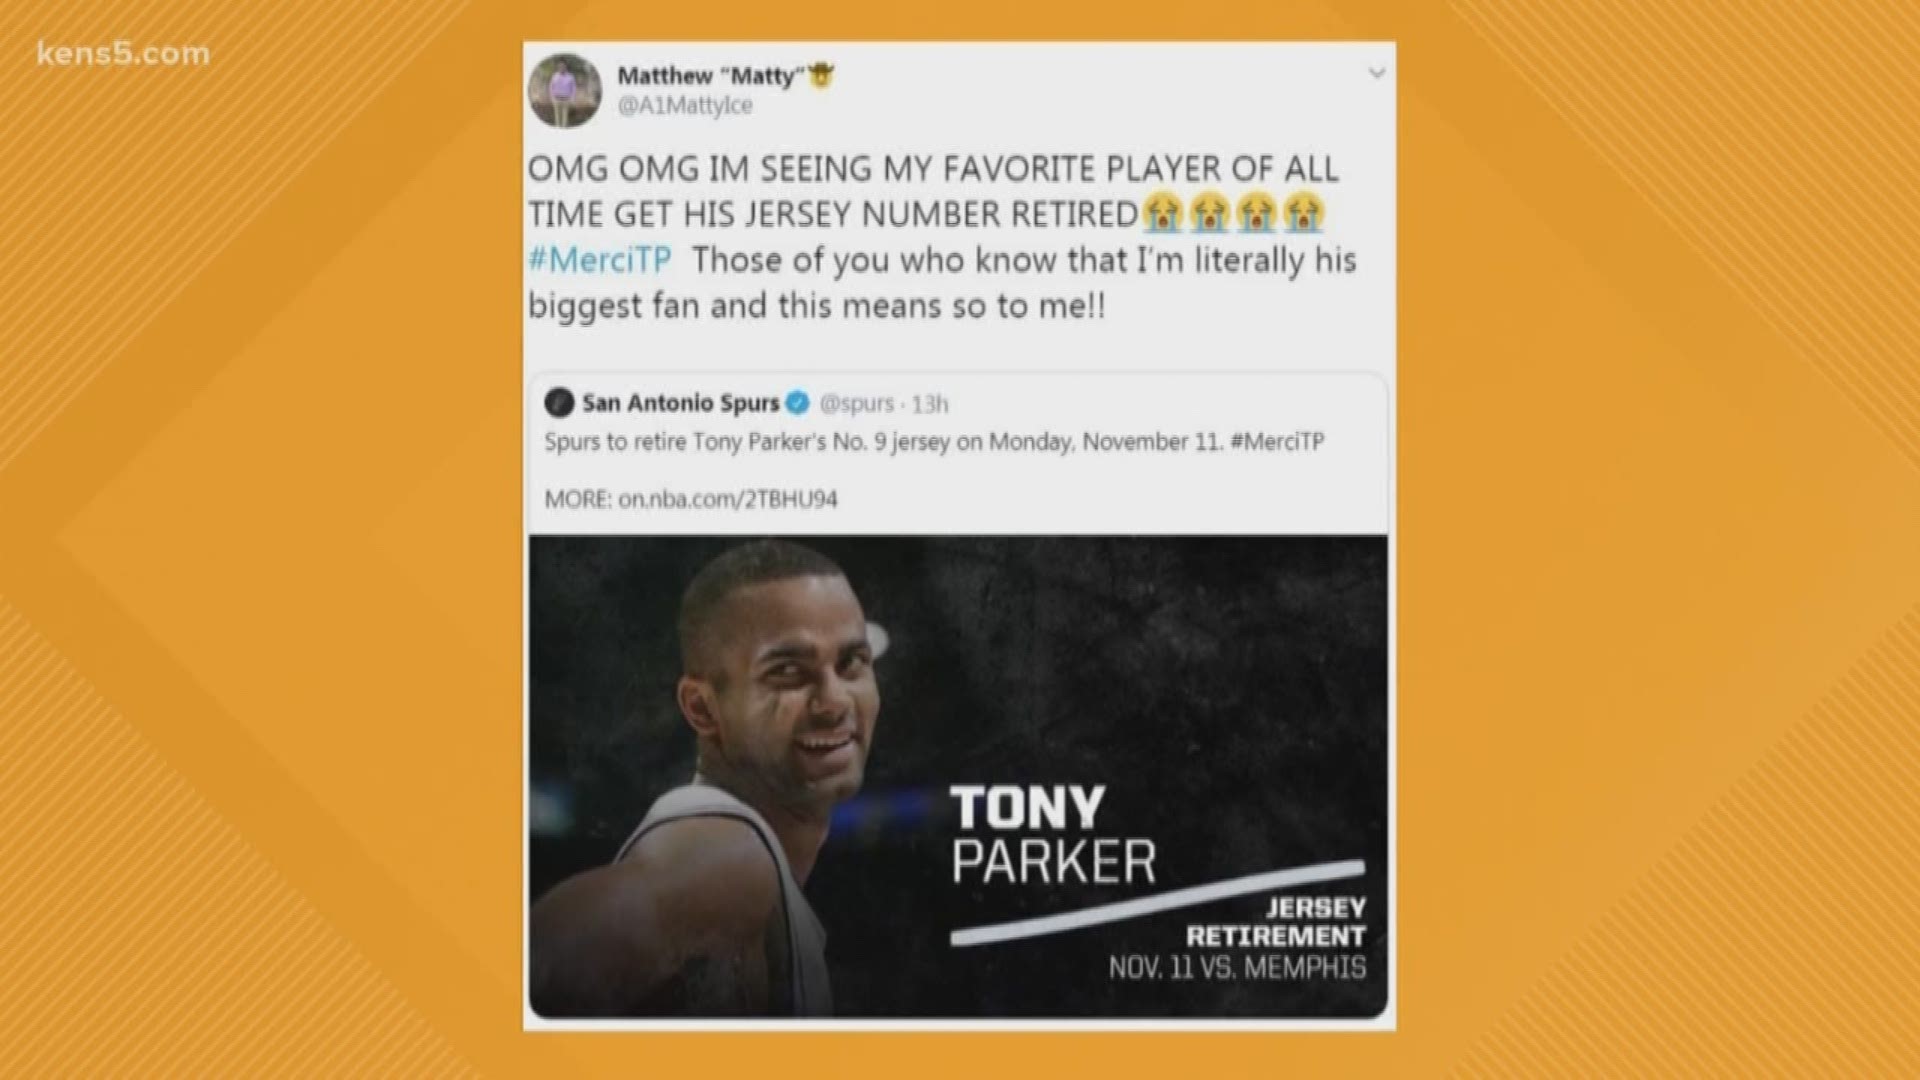 This week Spurs Sports & Entertainment announced that they will be retiring Tony Parker's jersey on November 11 against the Memphis Grizzlies and fans are looking forward to the ceremony. Digital Journalist Megan Ball shares what's trending across social media this week.